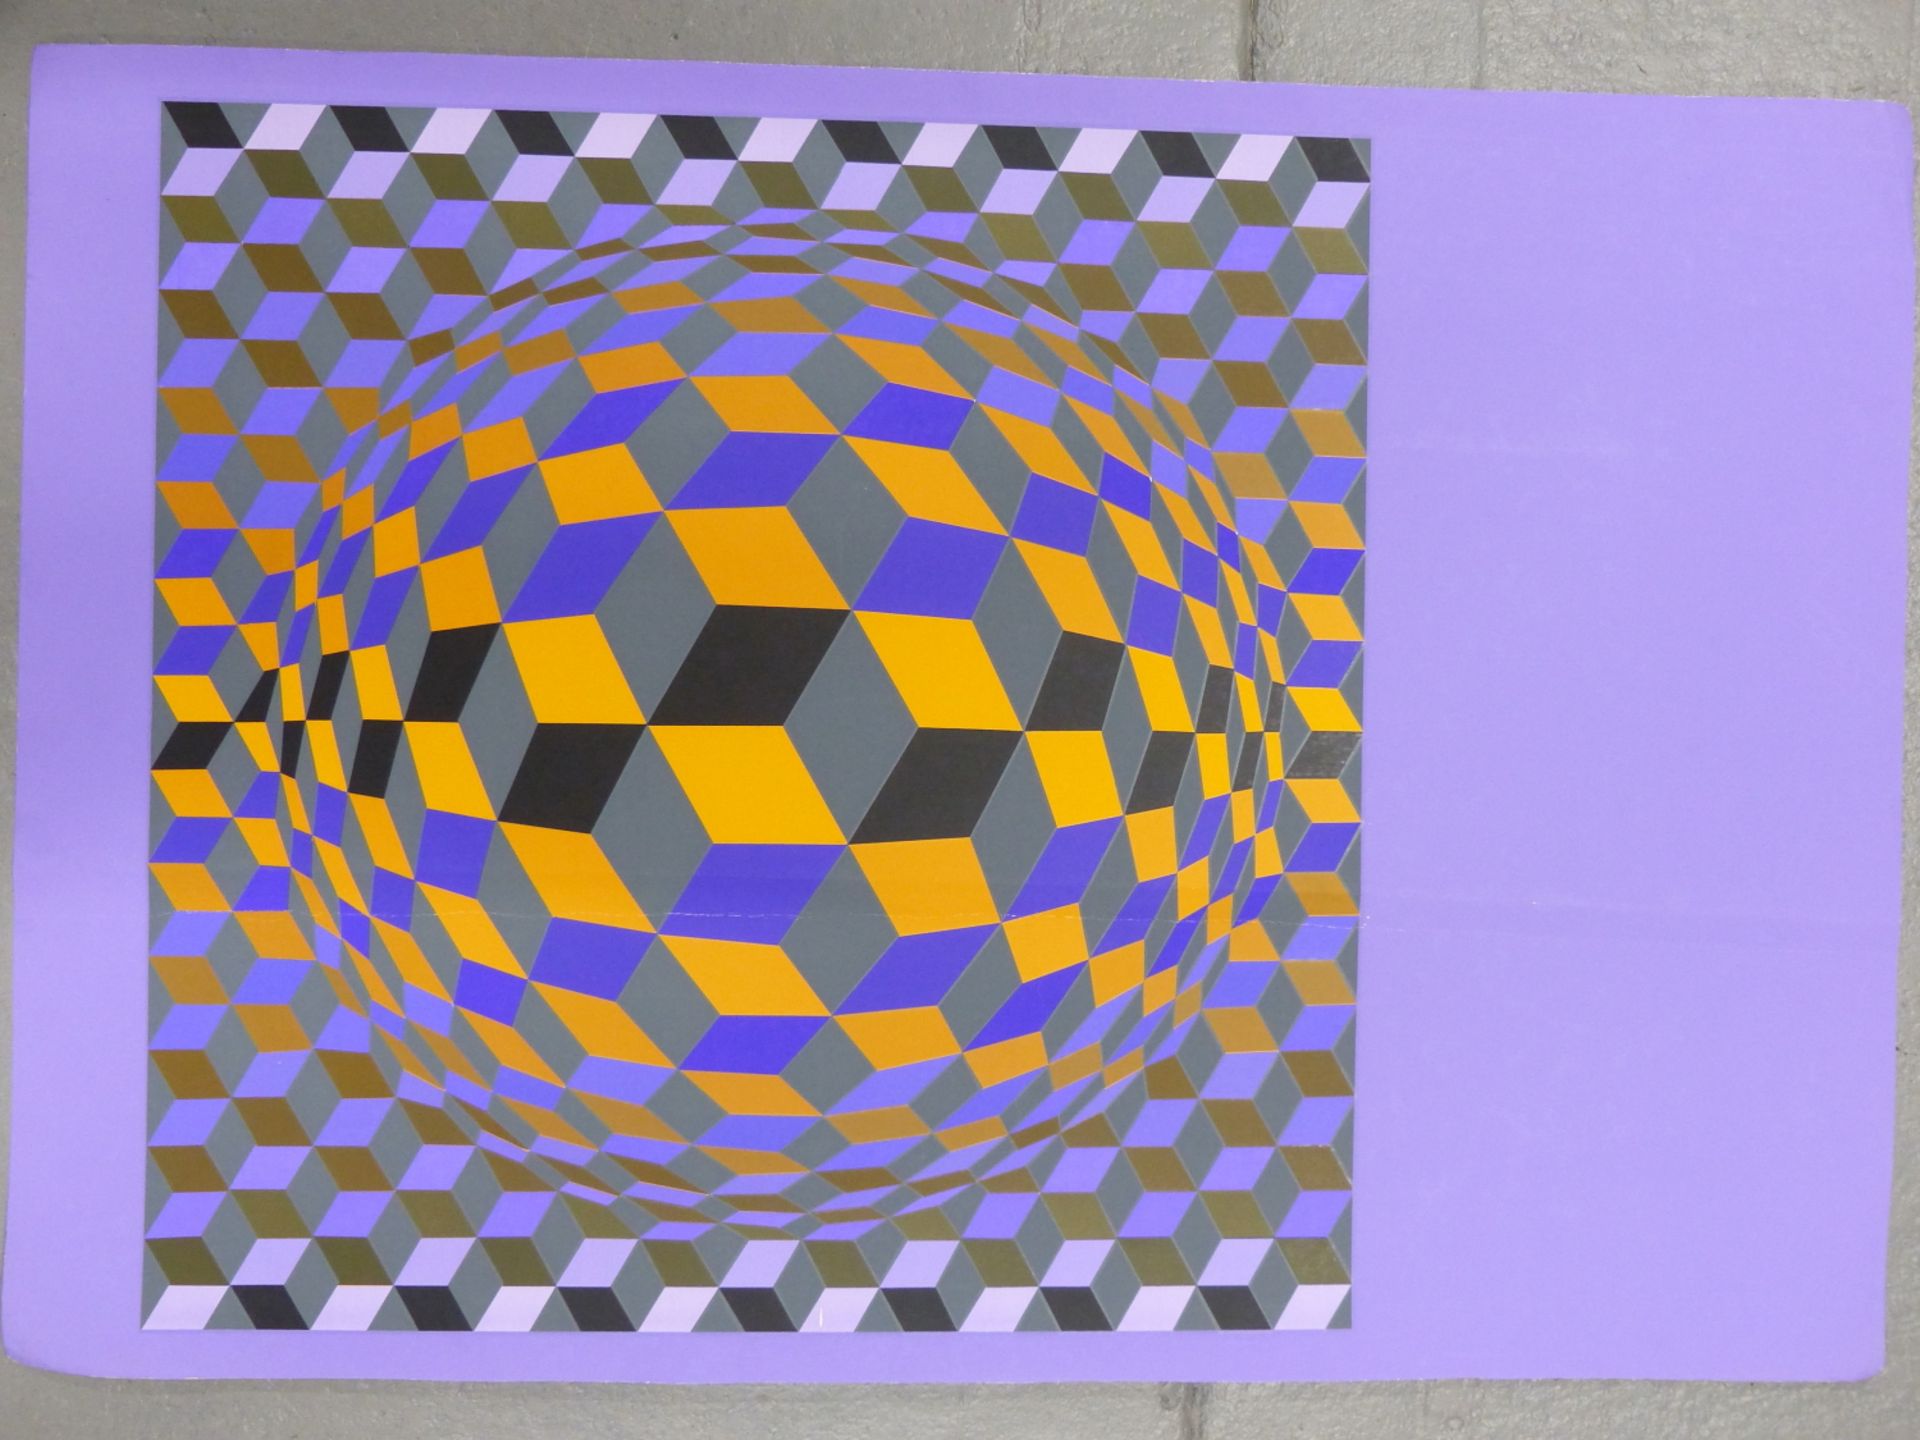 AFTER VICTOR VASARELY. UNTITLED COLOUR PRINT. 64 X 93cm TOGETHER WITH A 1977 EXHIBITION POSTER FOR - Image 3 of 6